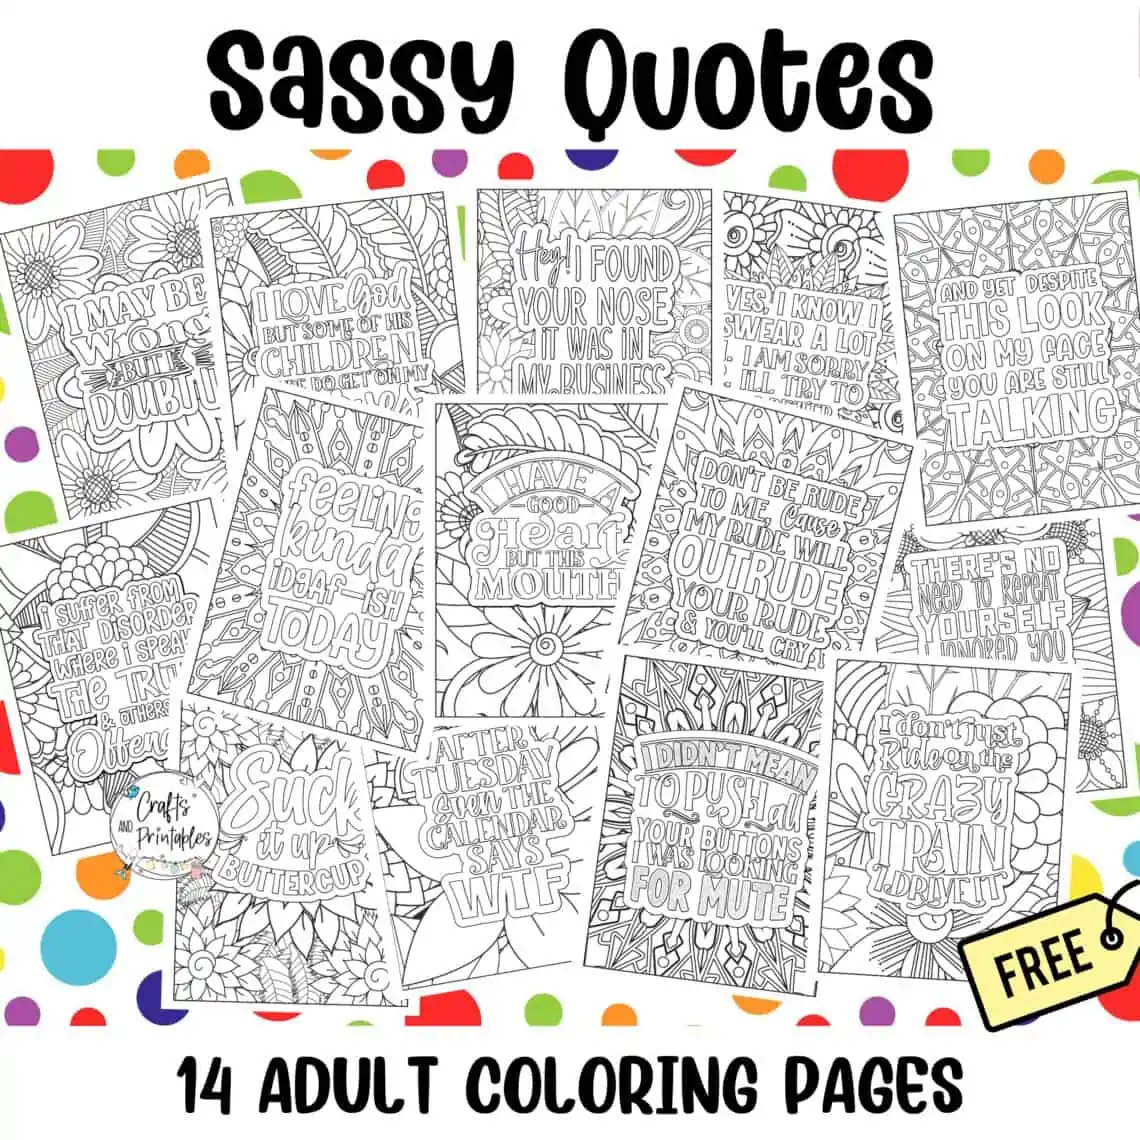 Sassy Quotes Adult Coloring Pages - free printable coloring pages adults only,funny adult coloring pages,hard coloring pages - Free Printable Coloring Pages Adults Only